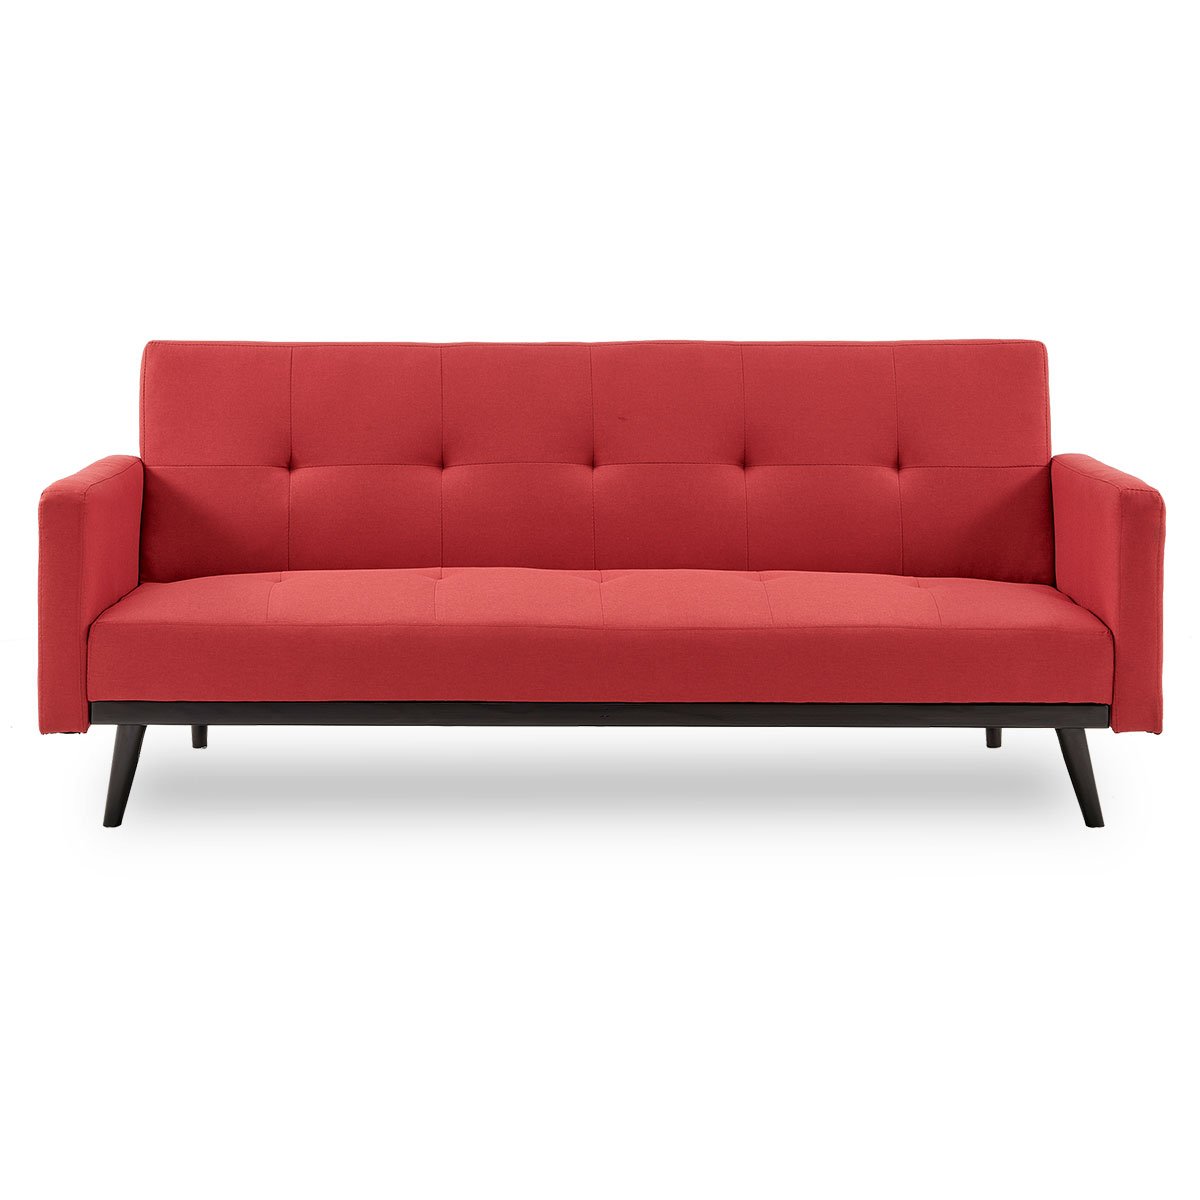 Sarantino Tufted Faux Linen 3-Seater Sofa Bed with Armrests - Red 1